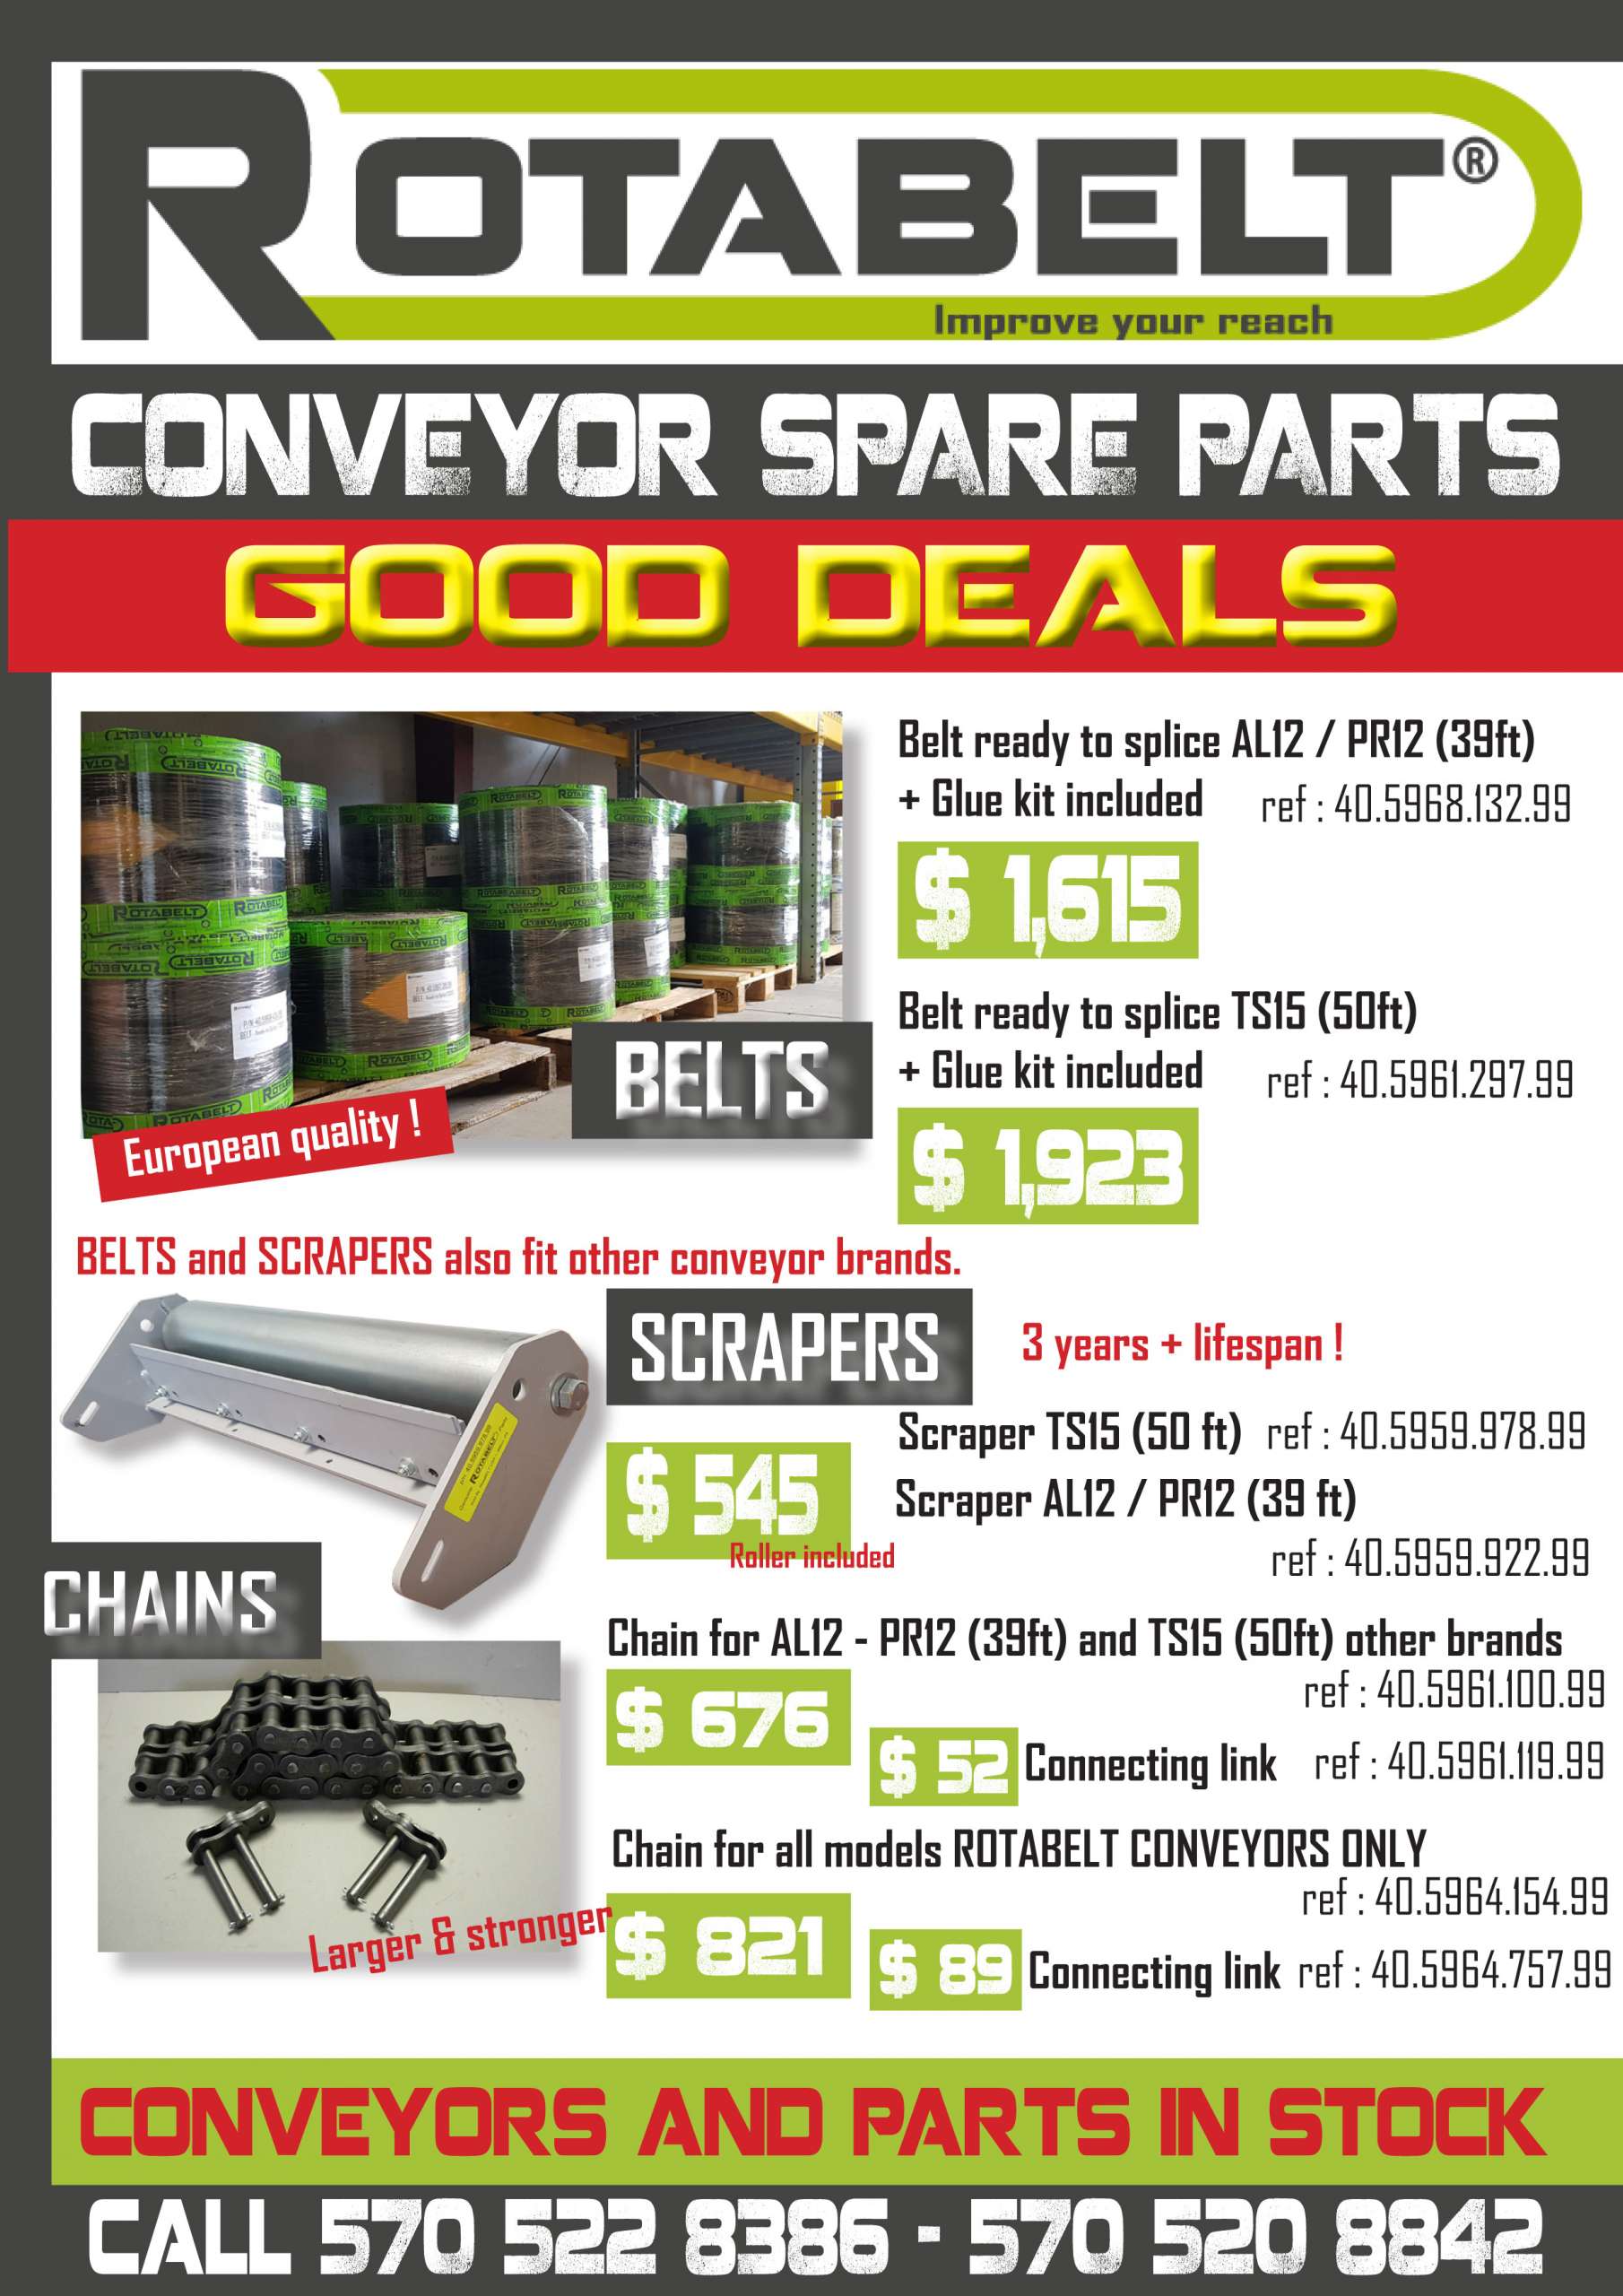 Spare parts mailing with really good deals available